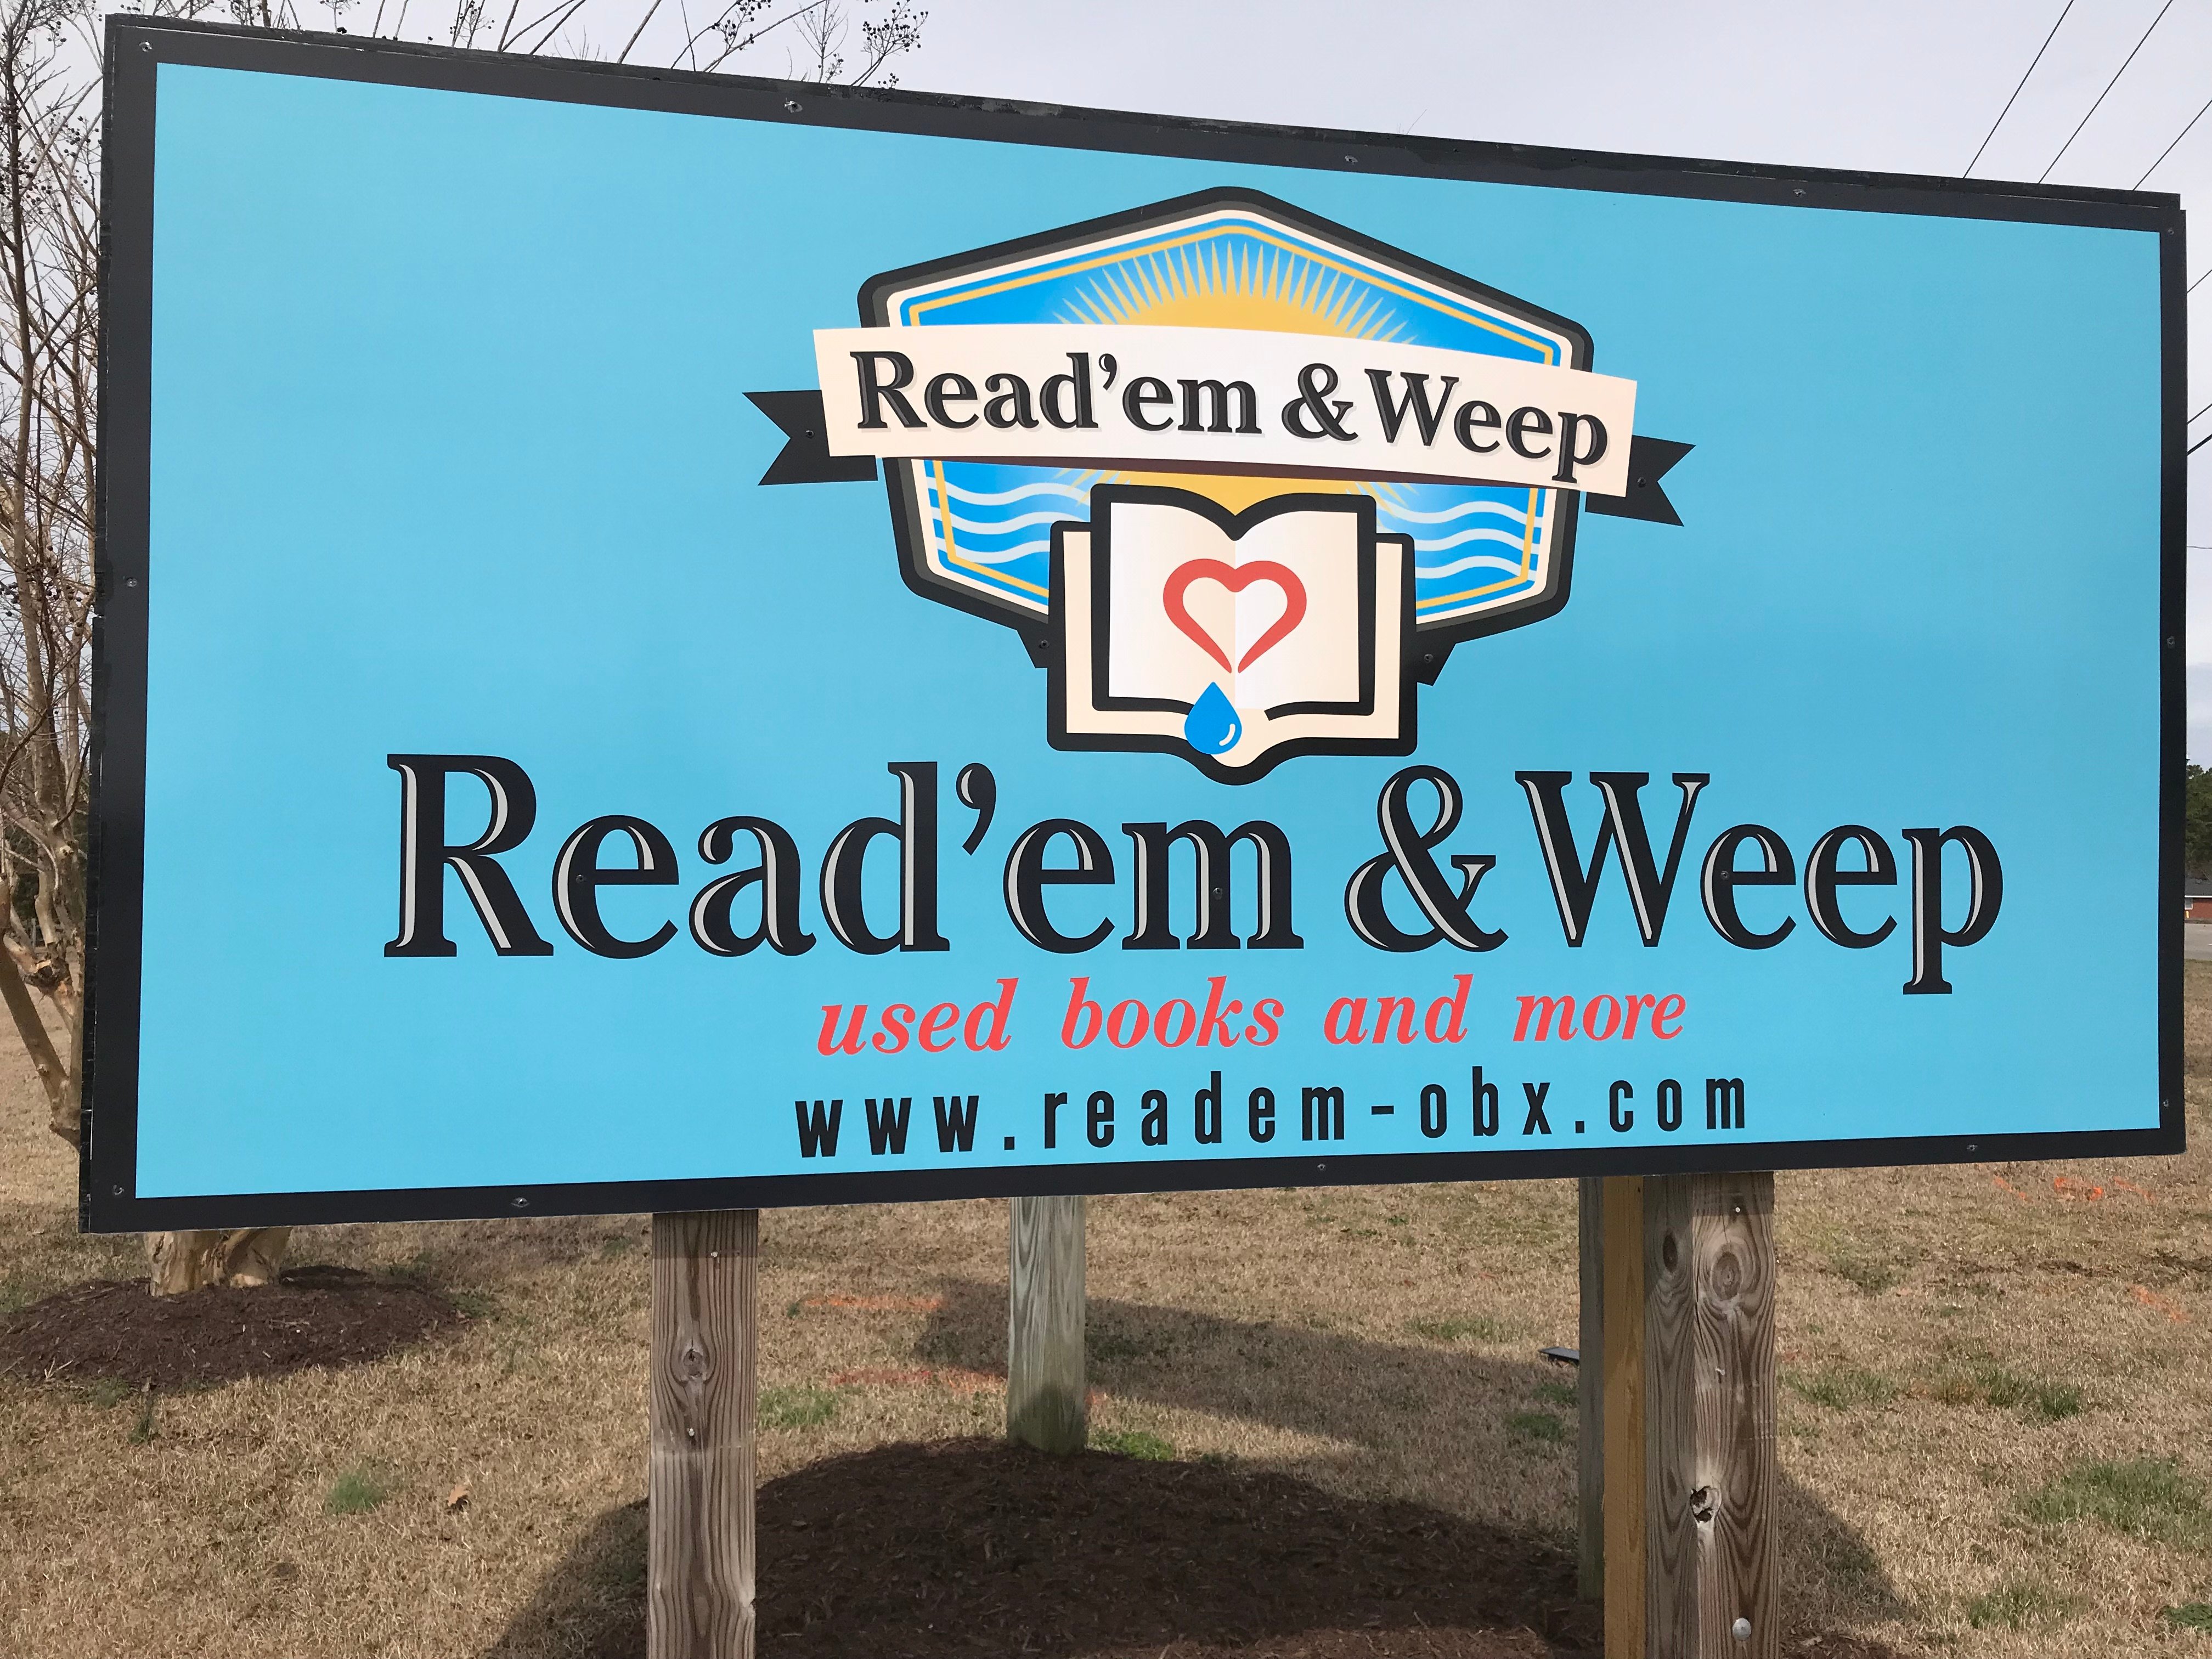 Read 'Em and Weep Currituck County Outer Banks book store 5